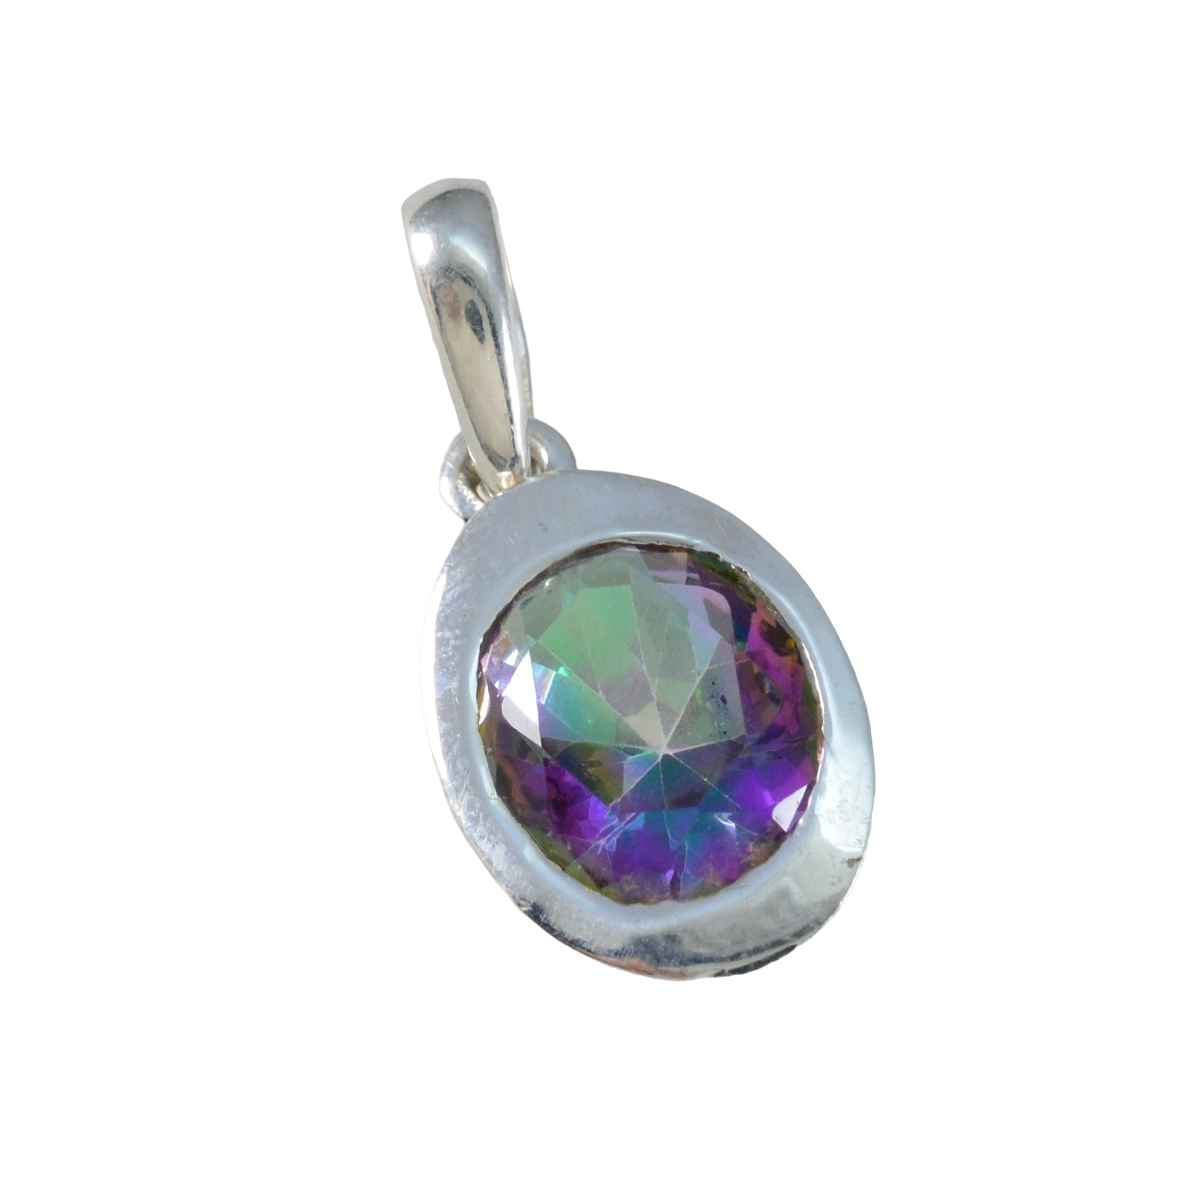 Riyo Good Gemstone Oval Faceted Multi Color Mystic Quartz 938 Sterling Silver Pendant Gift For Good Friday